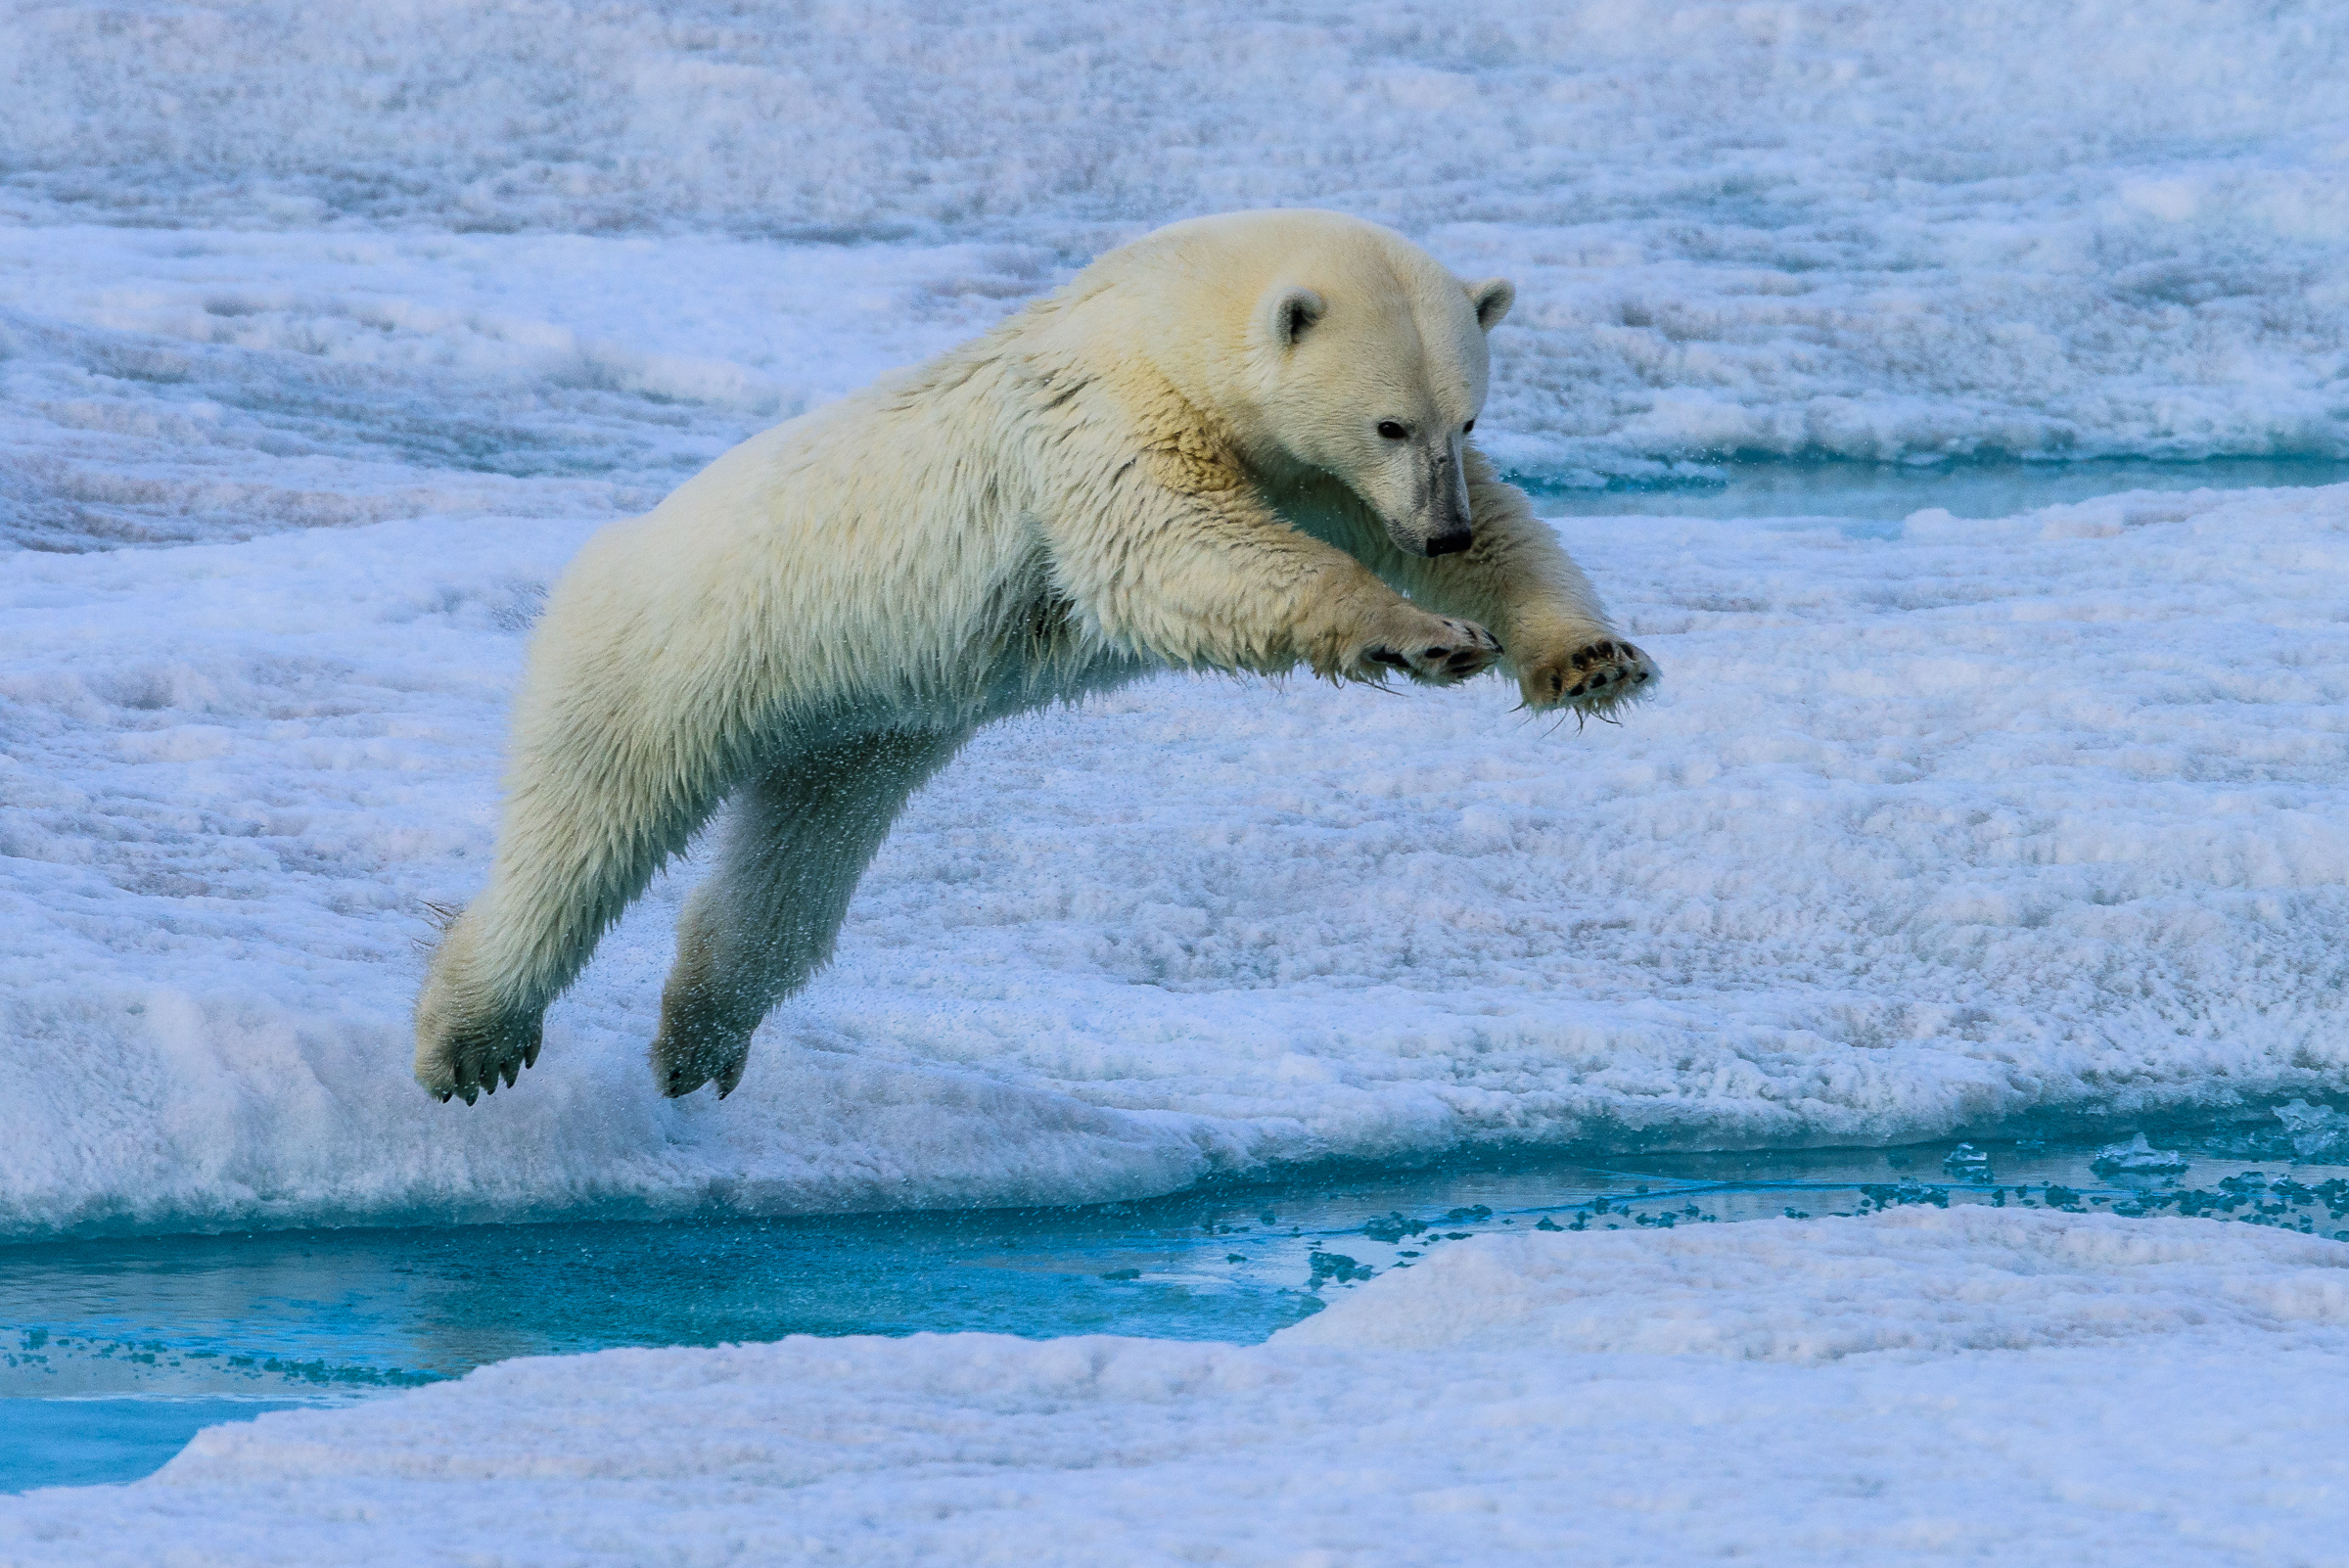 Polar bear jumping from one sheet of ice to the next